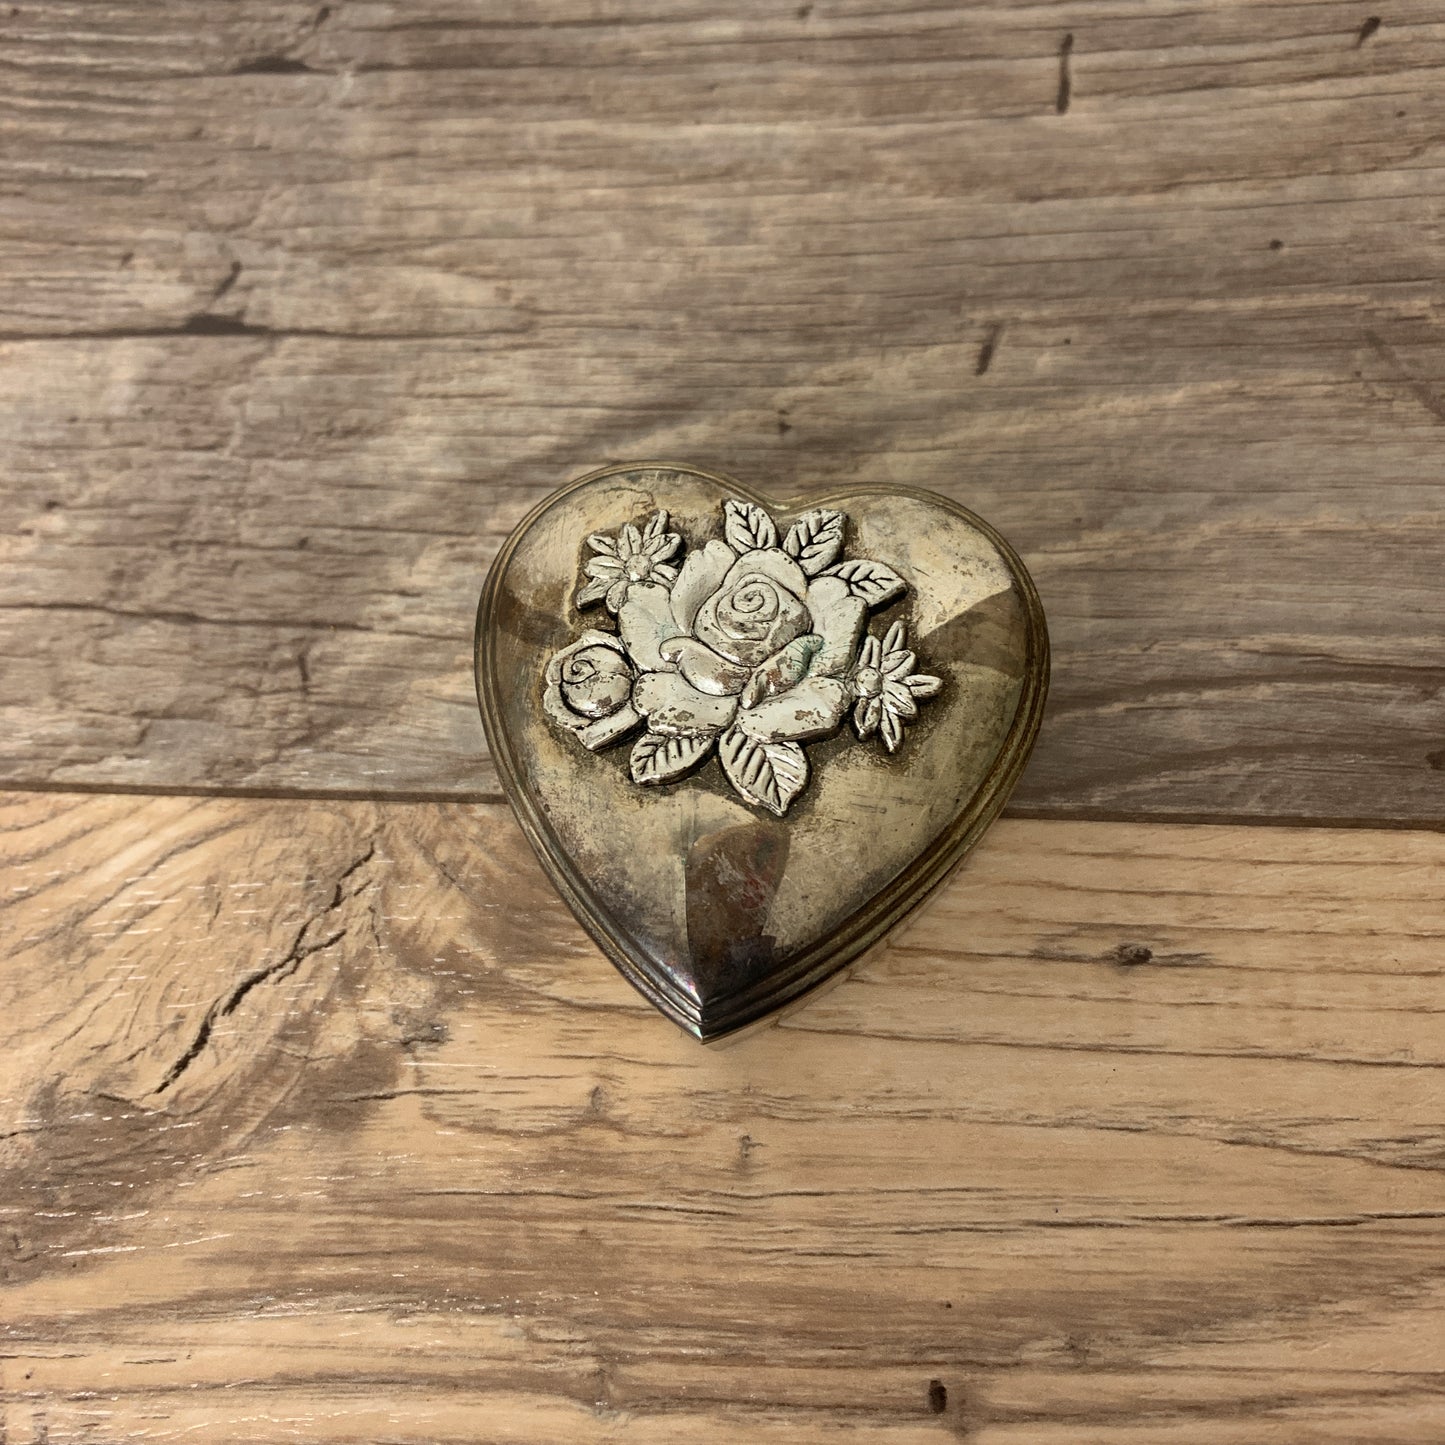 Small Silver Plated Heart Shaped Jewelry Box with 3D Flower